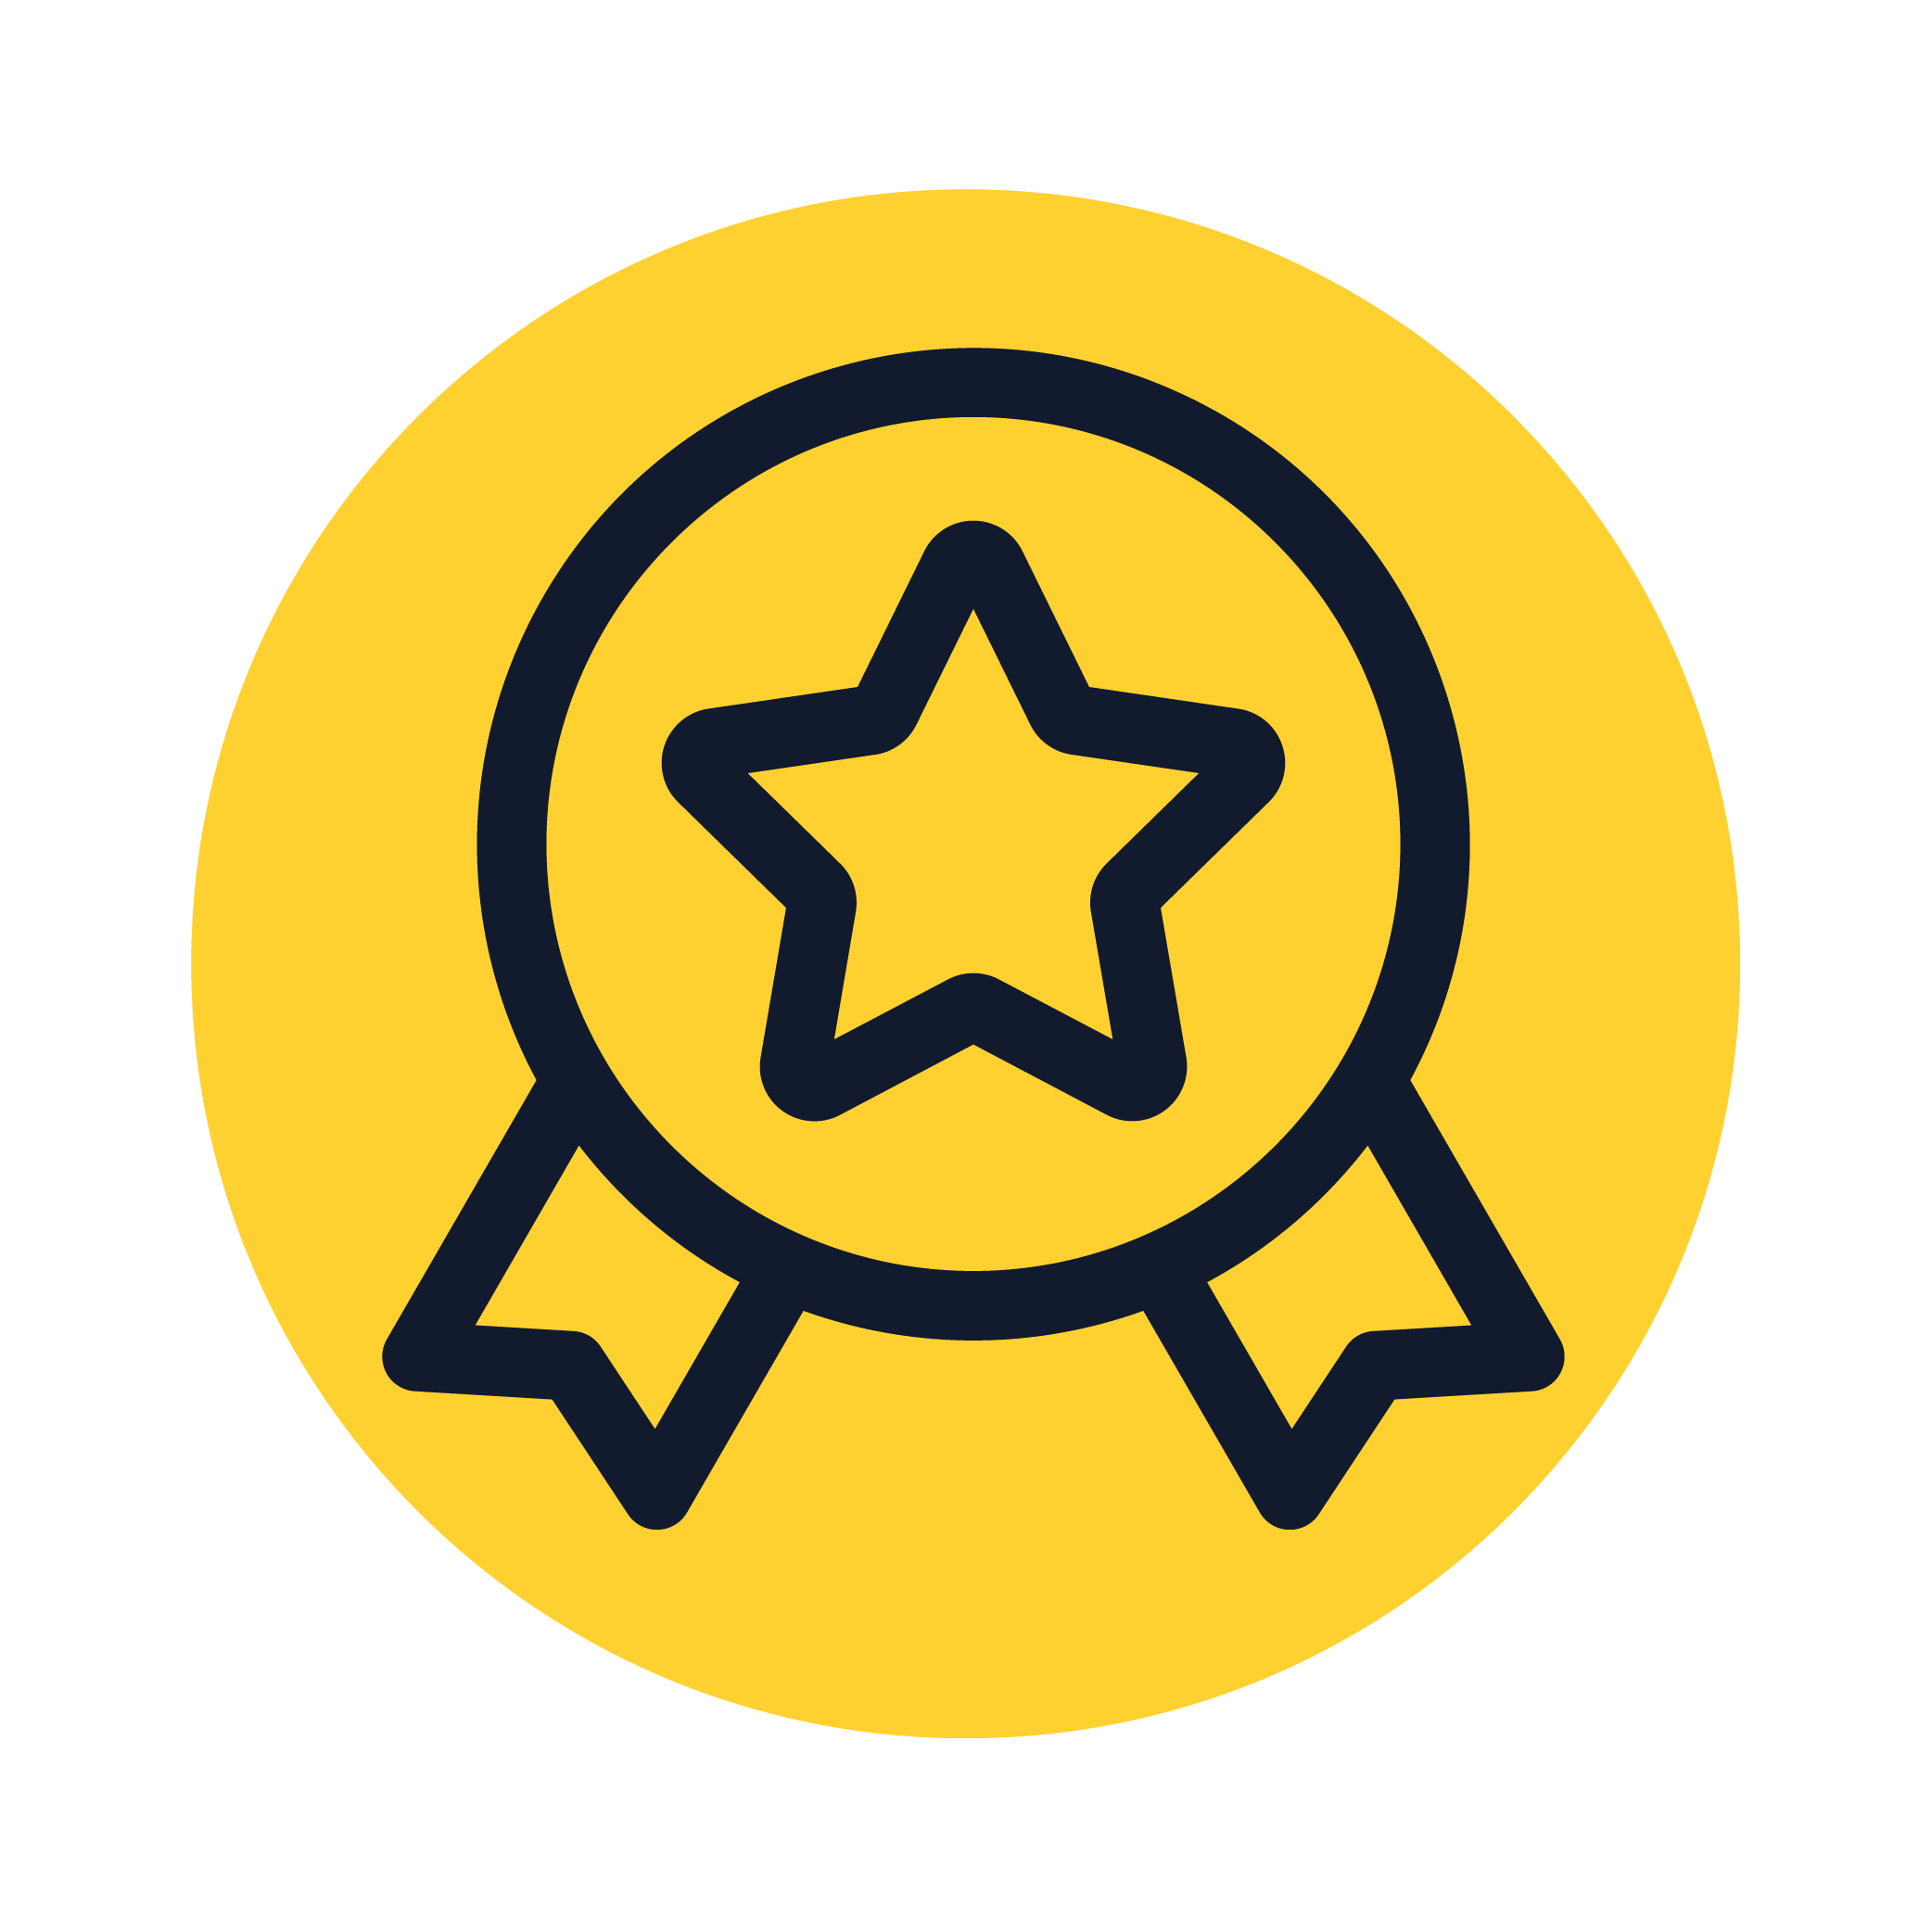 An icon of a badge with a star inside